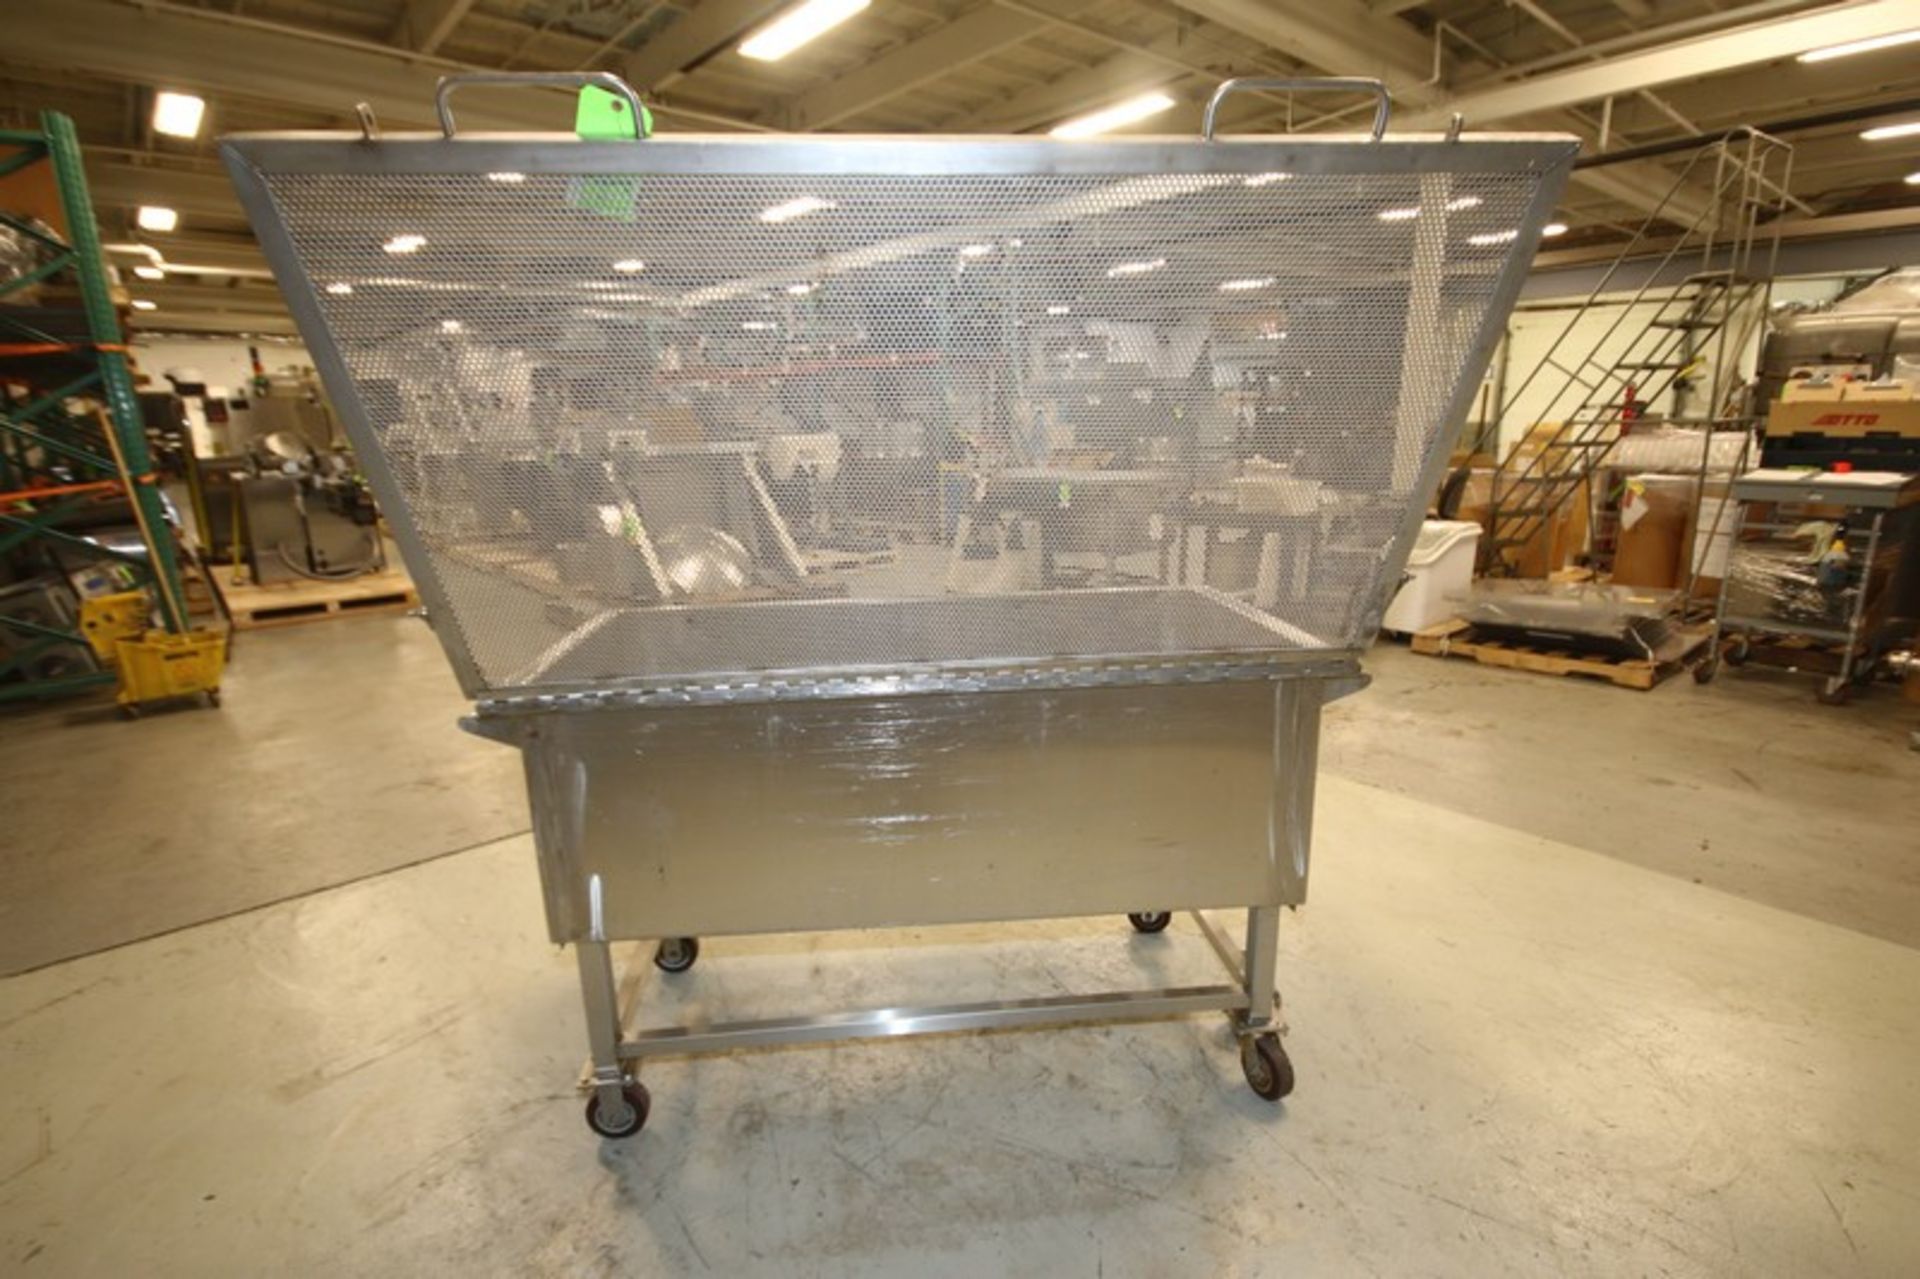 5' L x 30" W x 20" D S/S Portable Tank with Hinged Lid, 3" CT Drain (INV#92814) (Located @ the MDG - Image 4 of 5